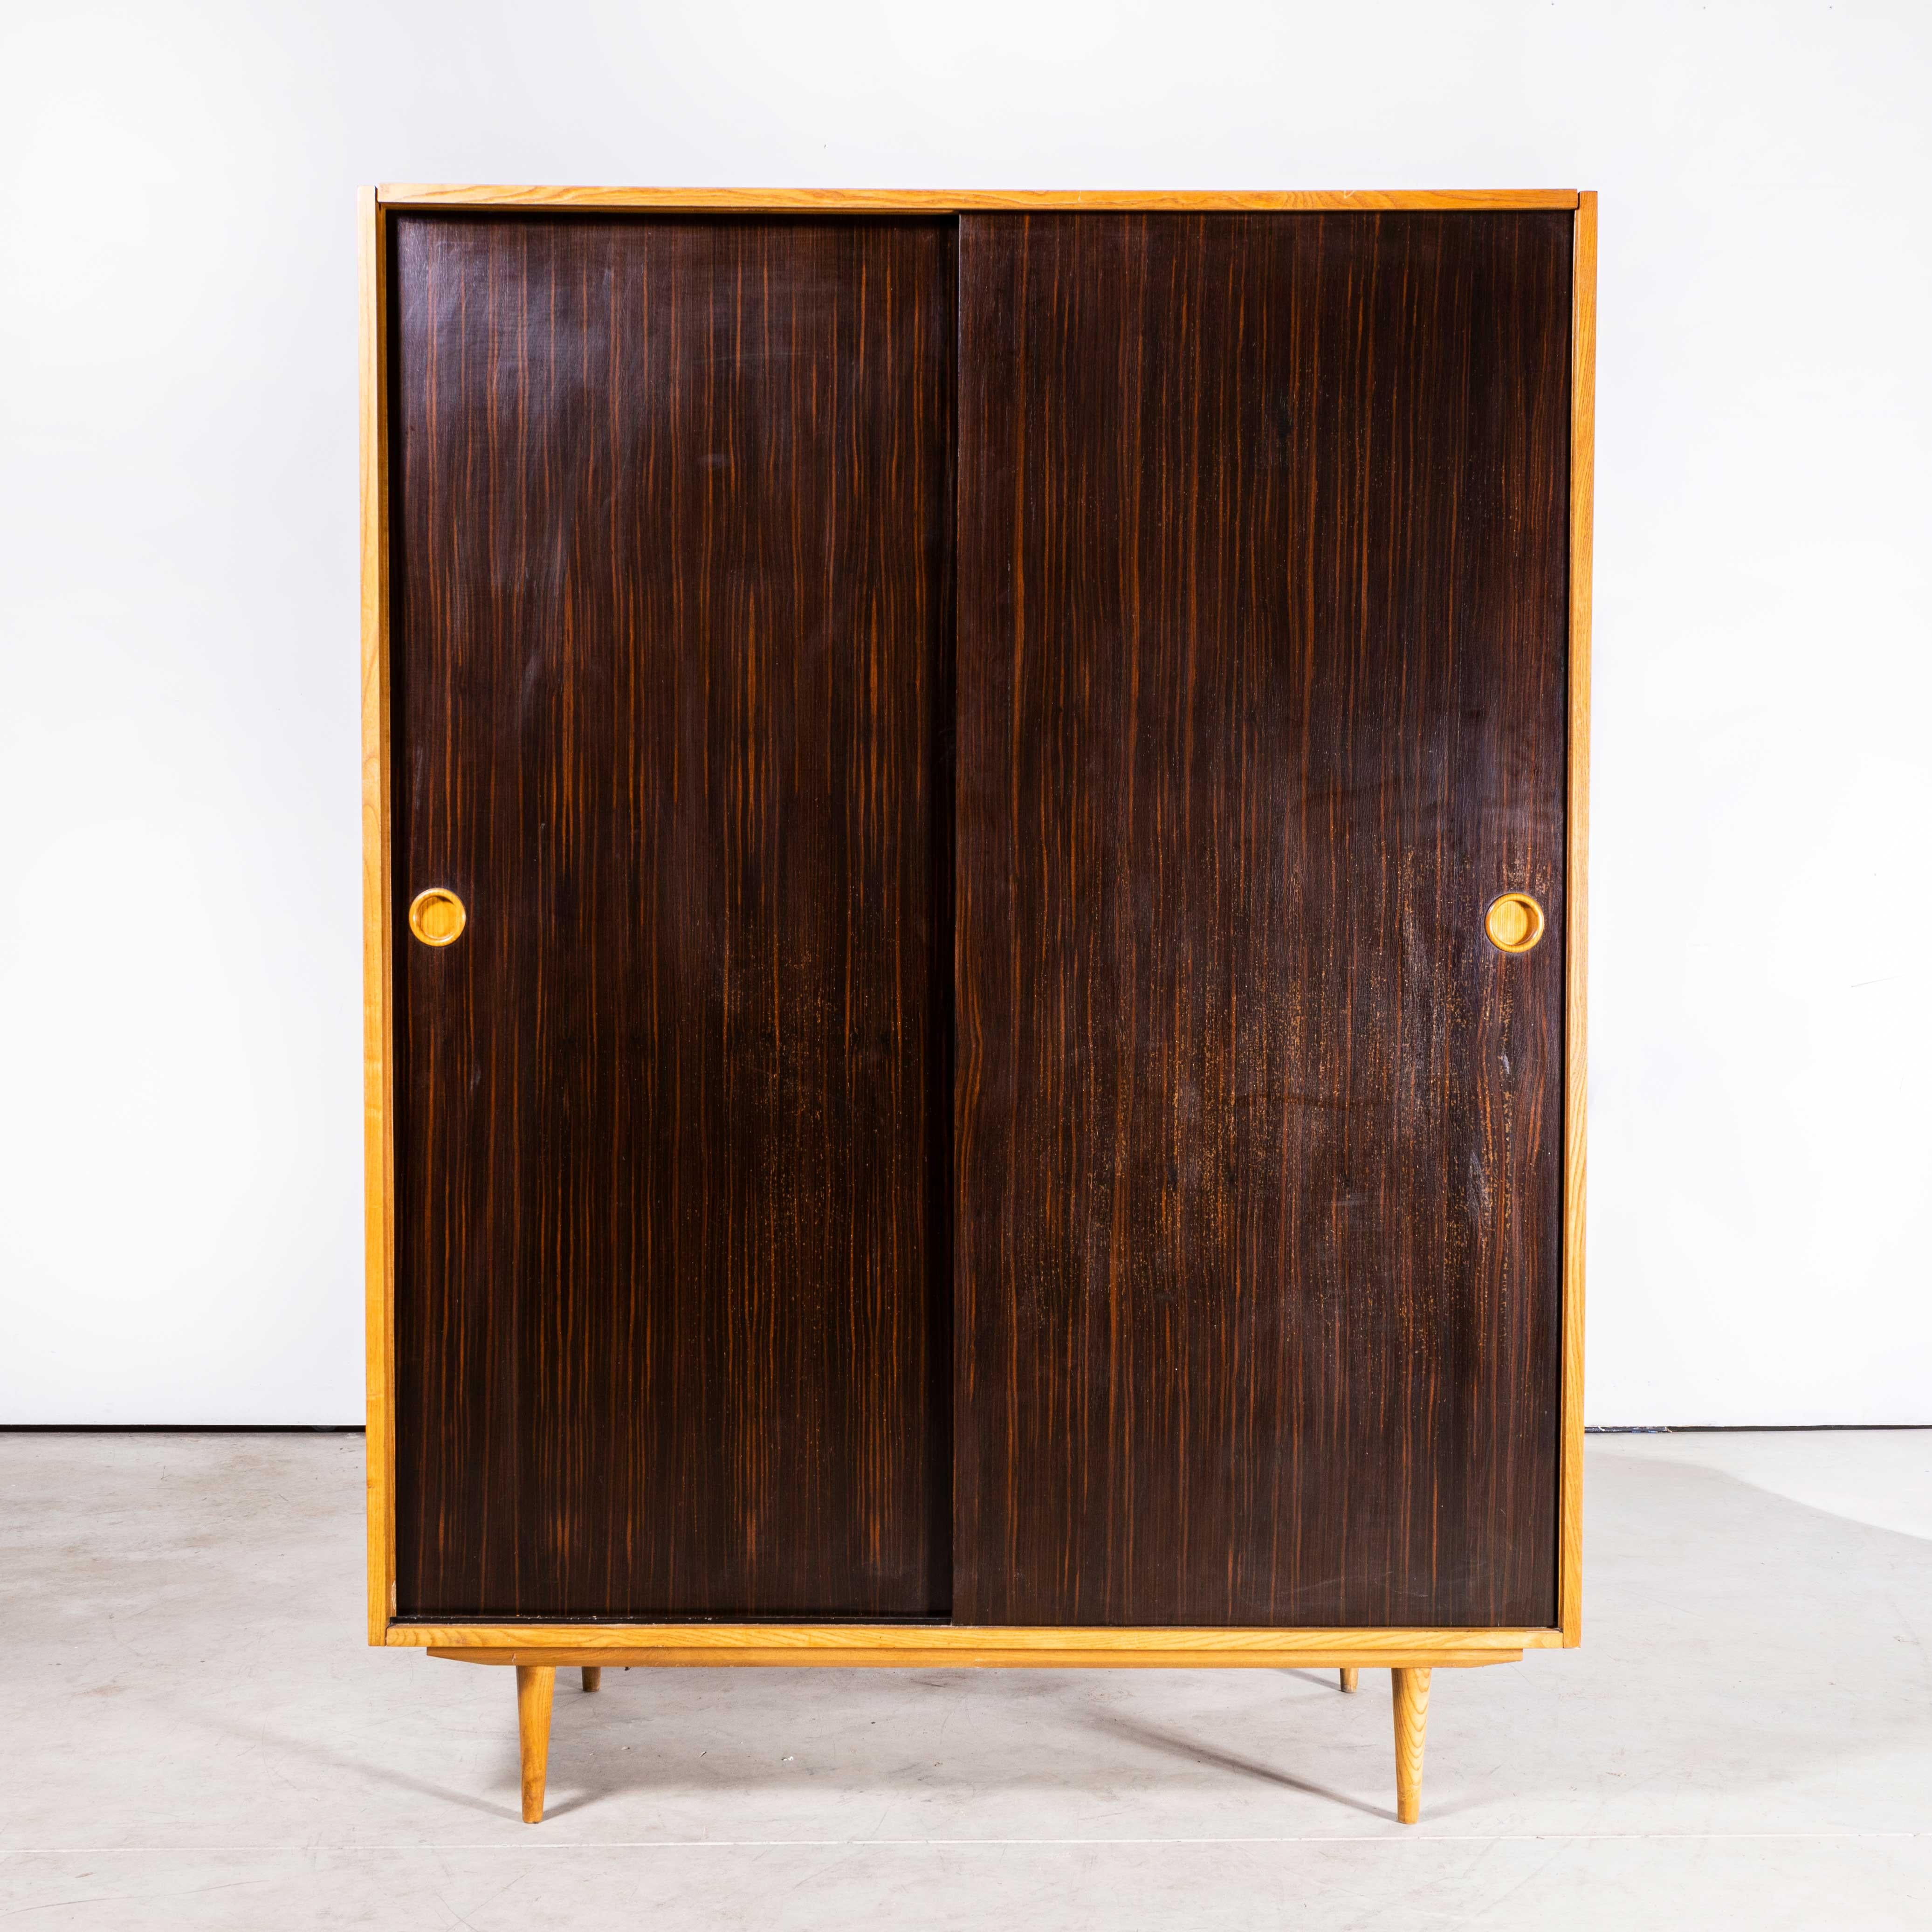 1960s Large midcentury Dark Oak Wardrobe
1960s Large midcentury Dark Oak Wardrobe. Beautiful simple and Classic midcentury wardrobe sourced in the Czech Republic. The wardrobe is beautifully made with rich dark stained striped oak doors with a